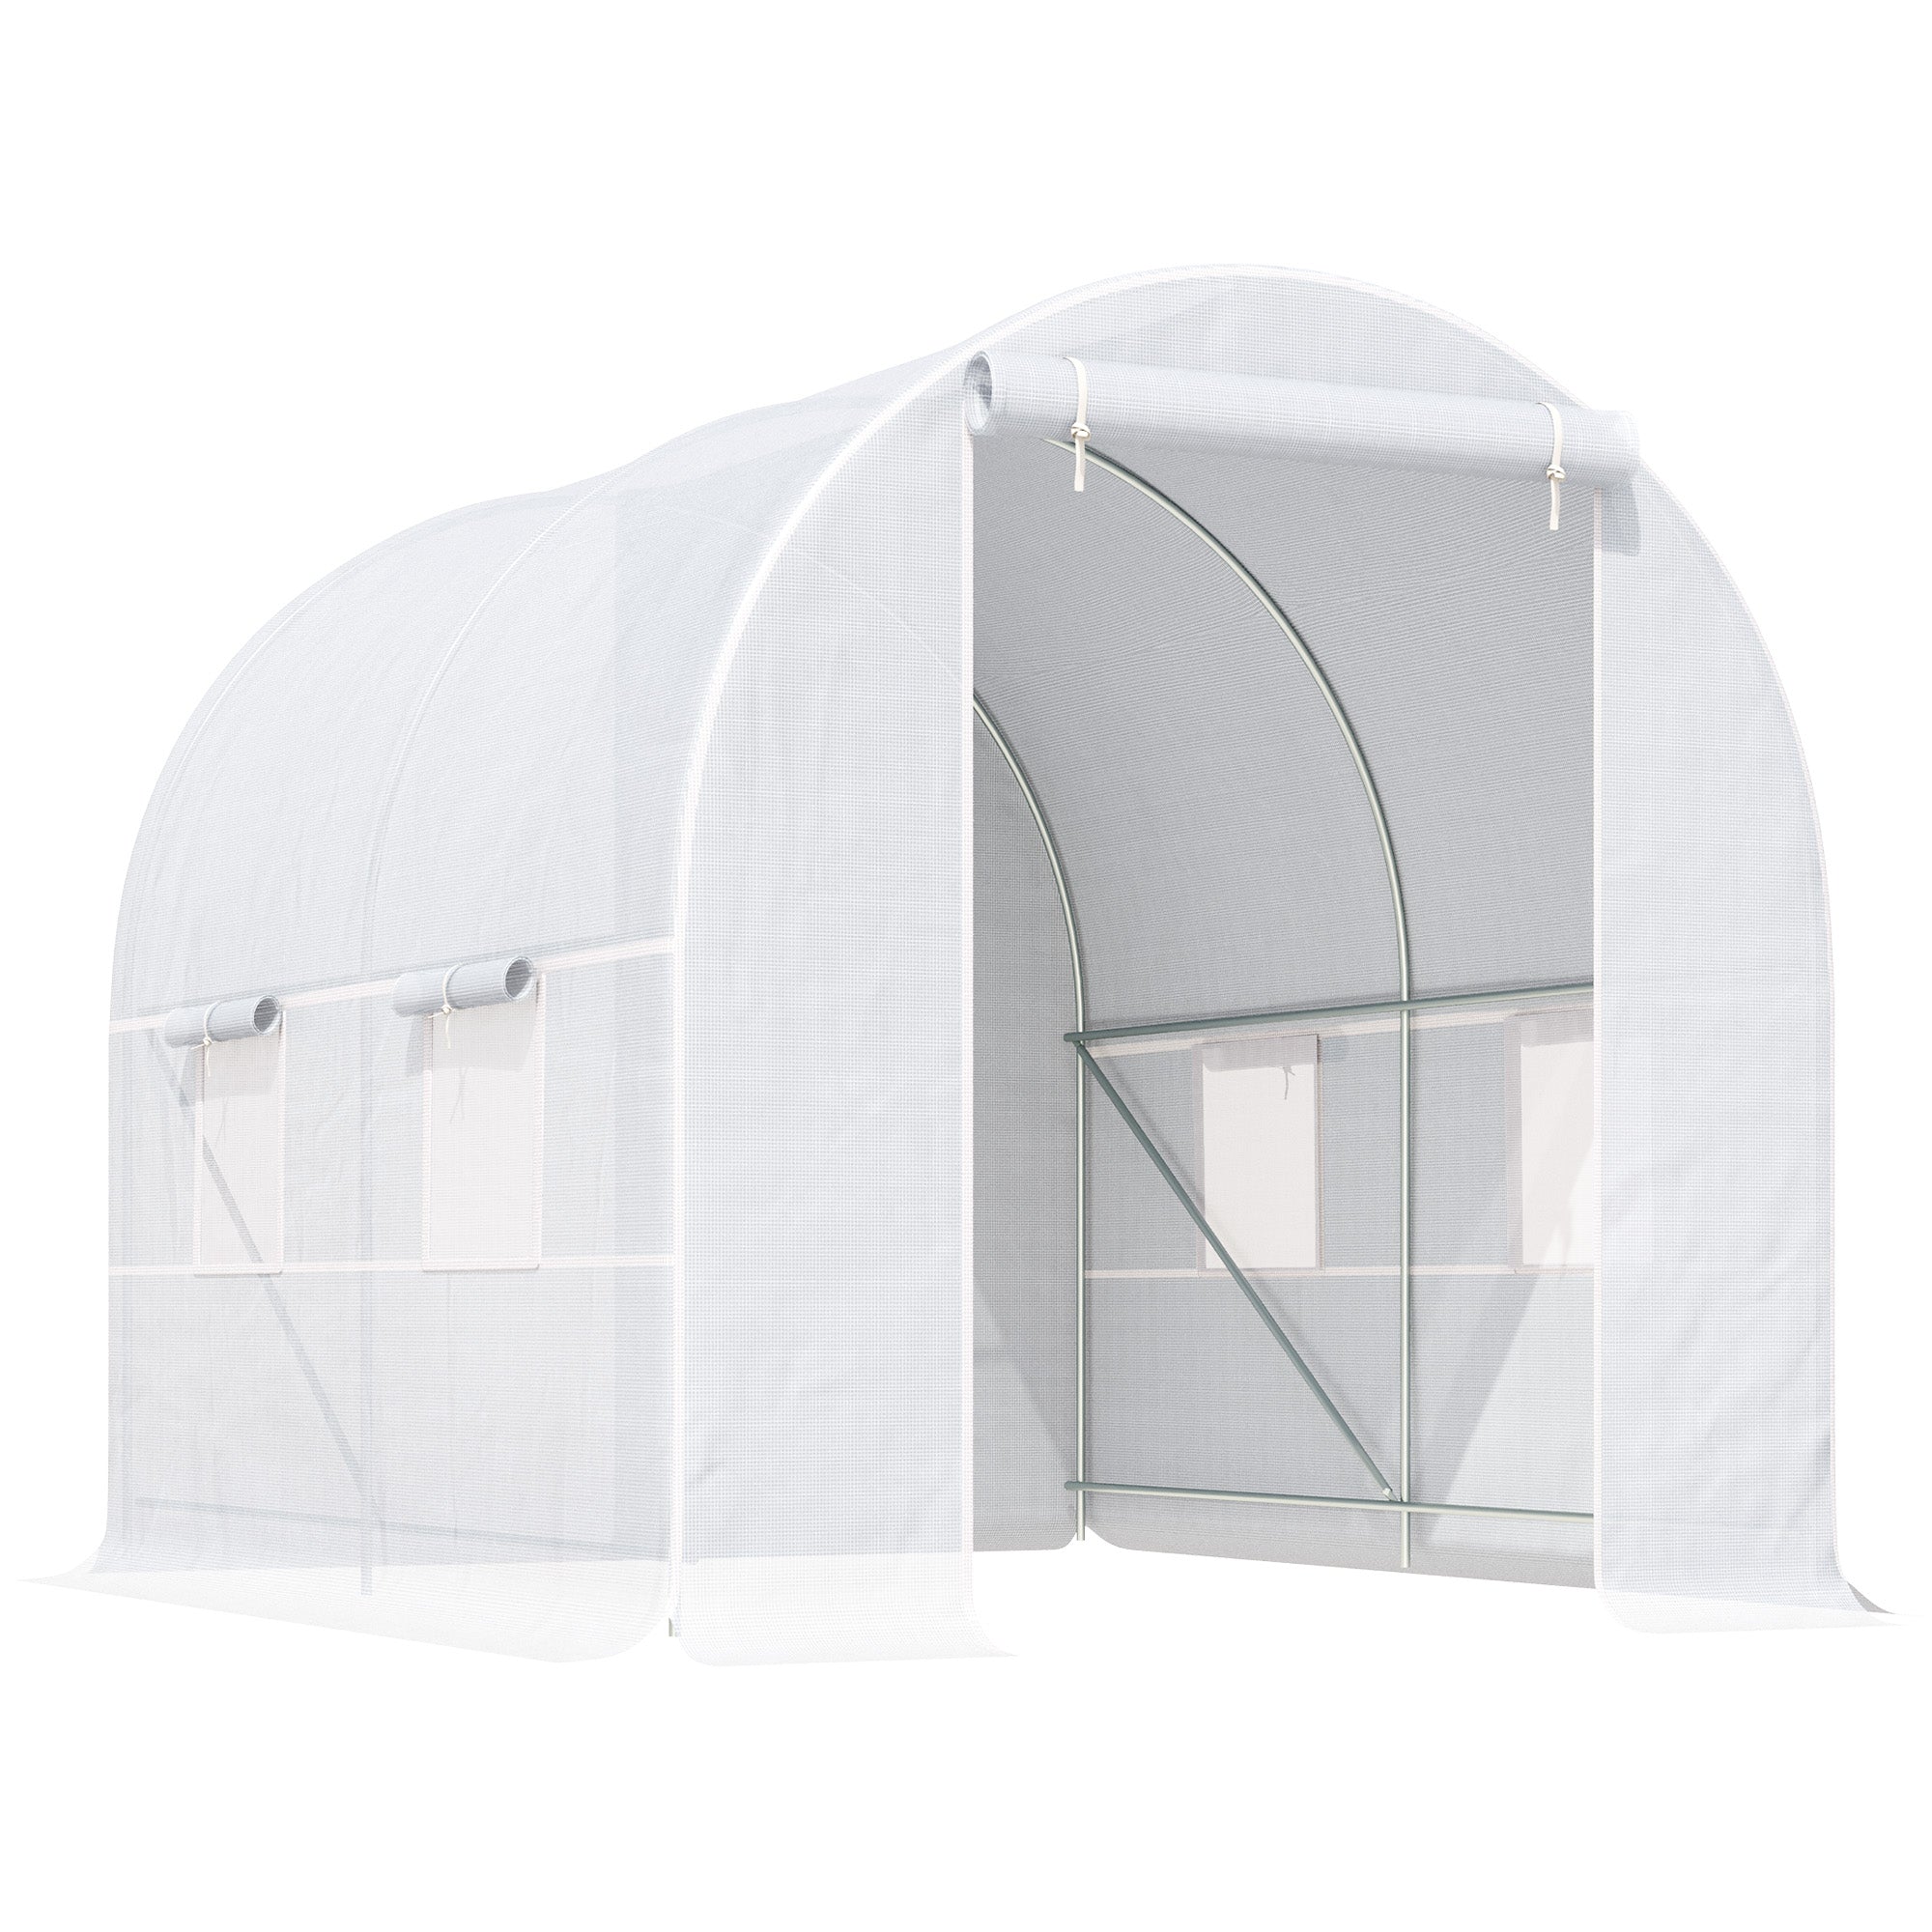 2.5 x 2 x 2 m Large Galvanized Steel Frame Outdoor Poly Tunnel Garden Walk-In Patio Greenhouse - White-0